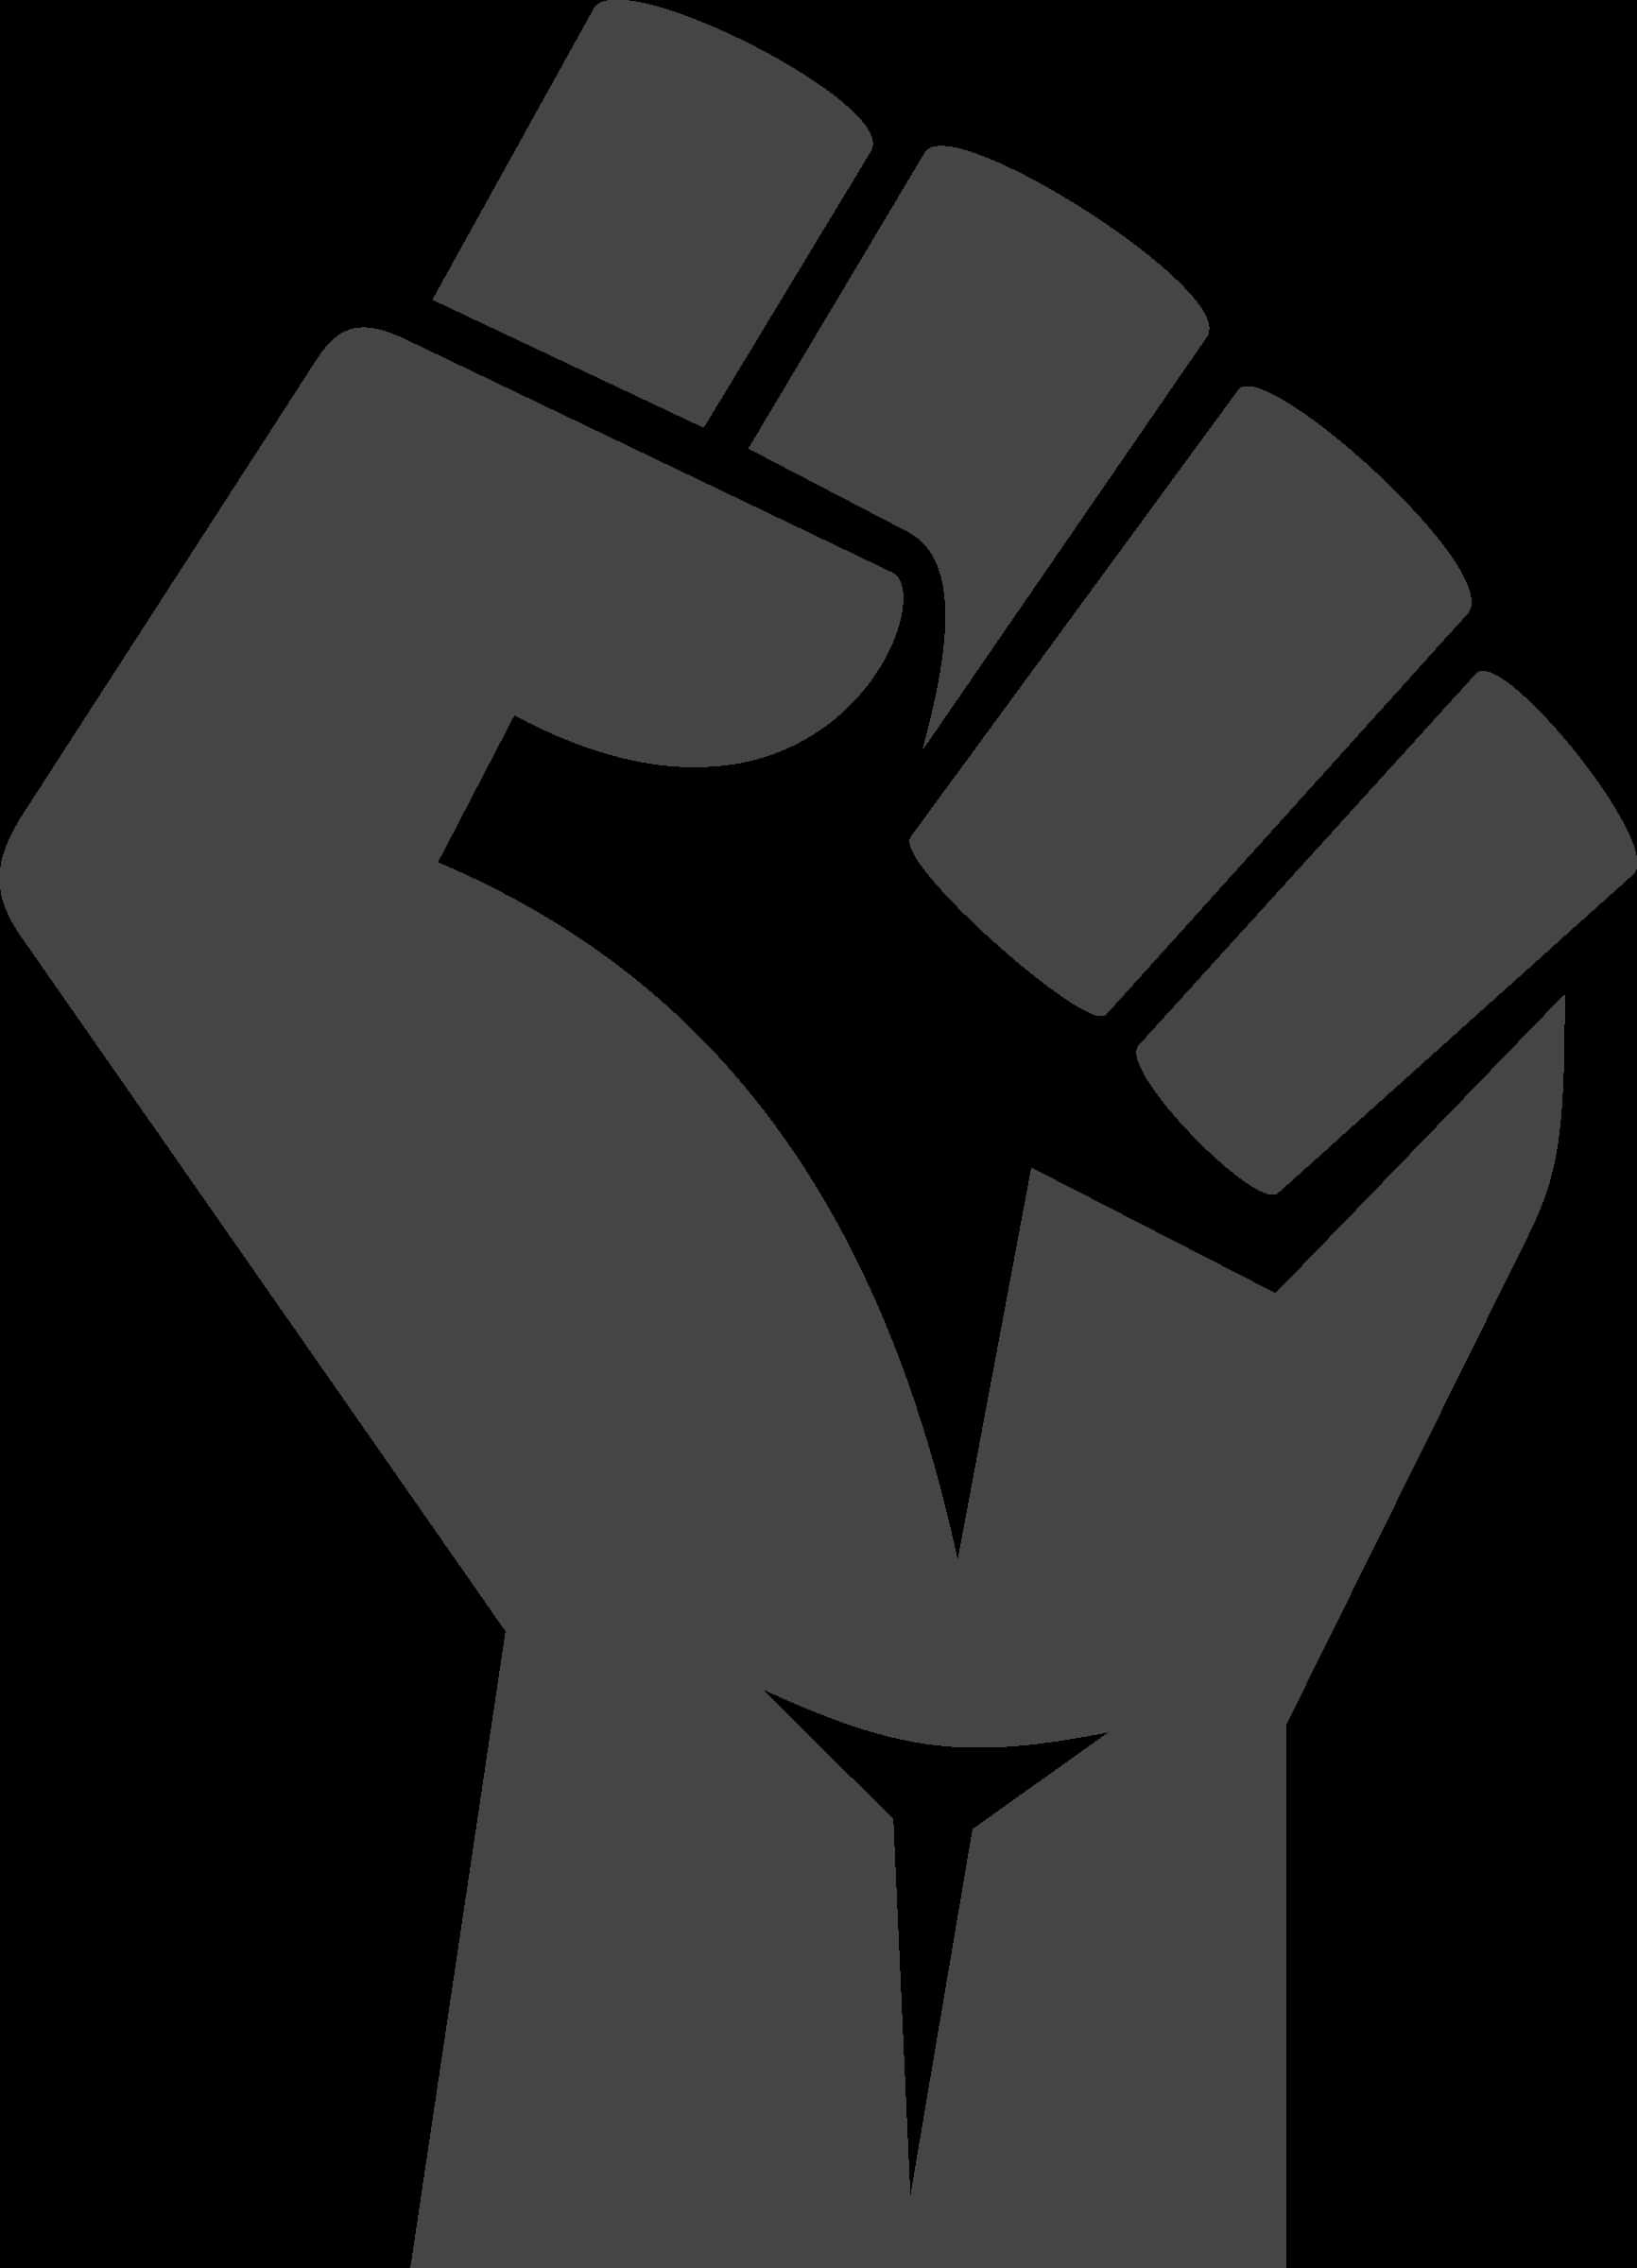 Raised Fist Silhouette Graphic PNG